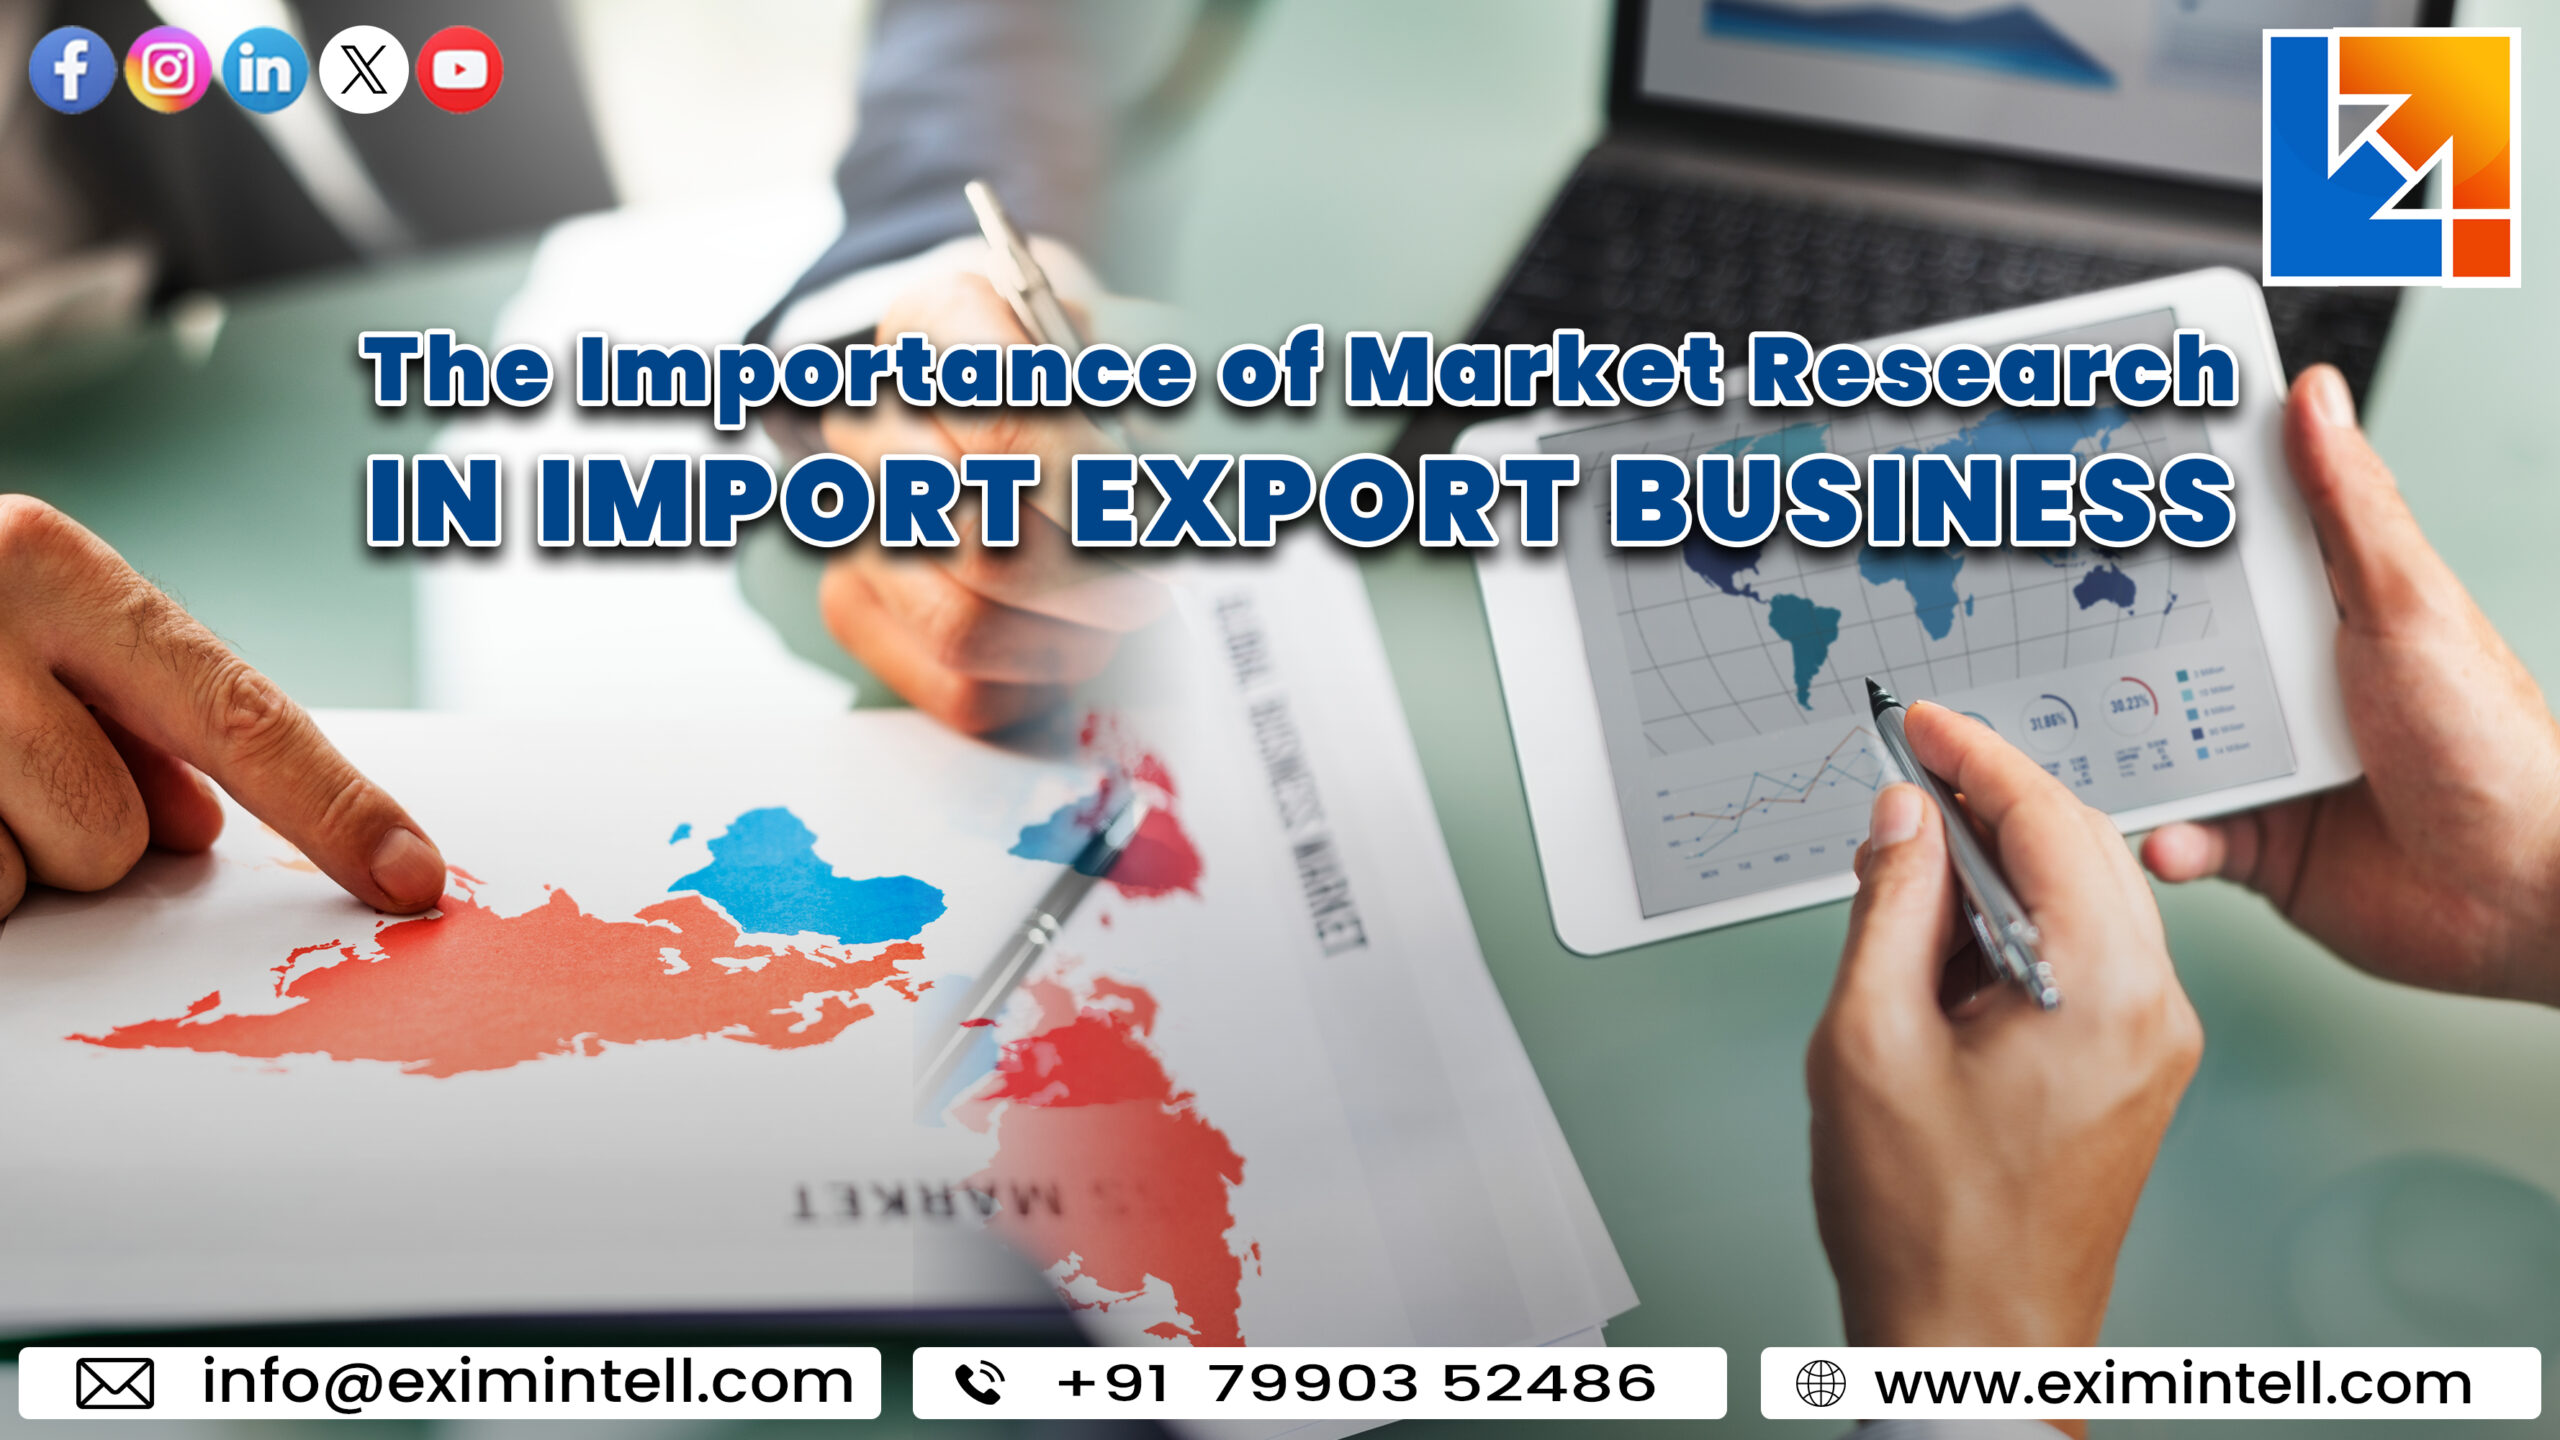 The Importance of Market Research in Import Export Business